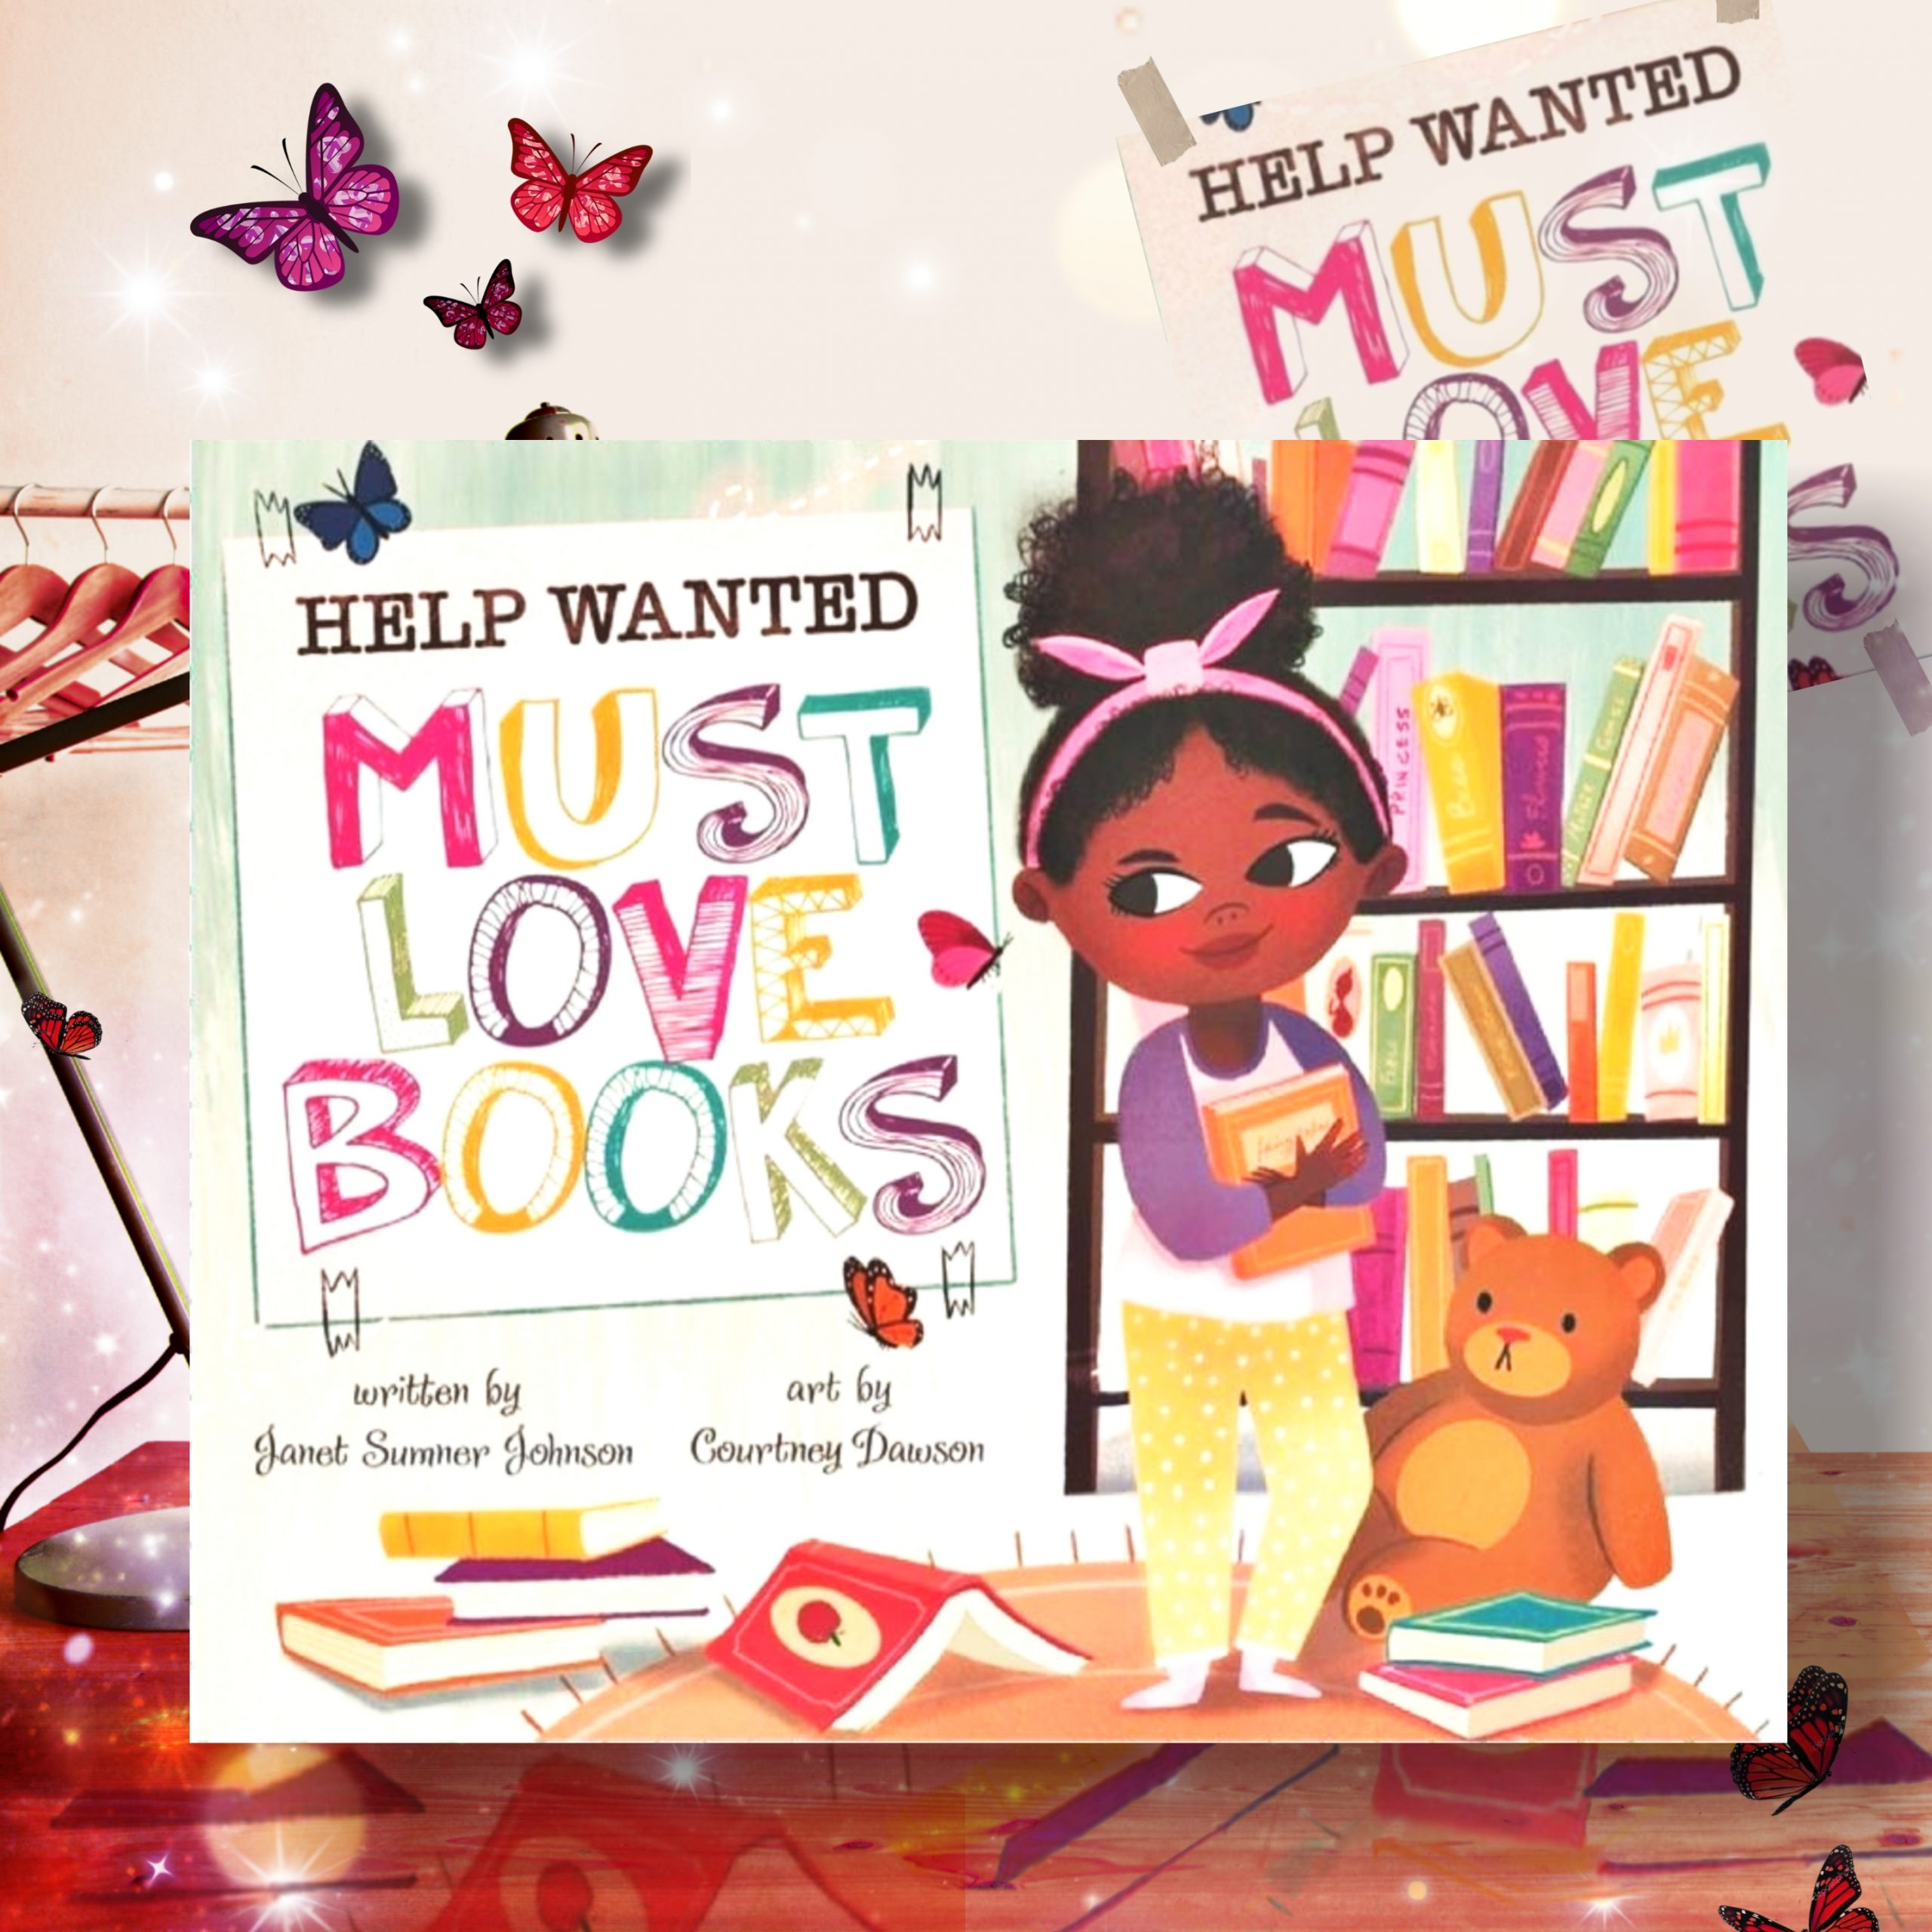 Help wanted Must Love Books